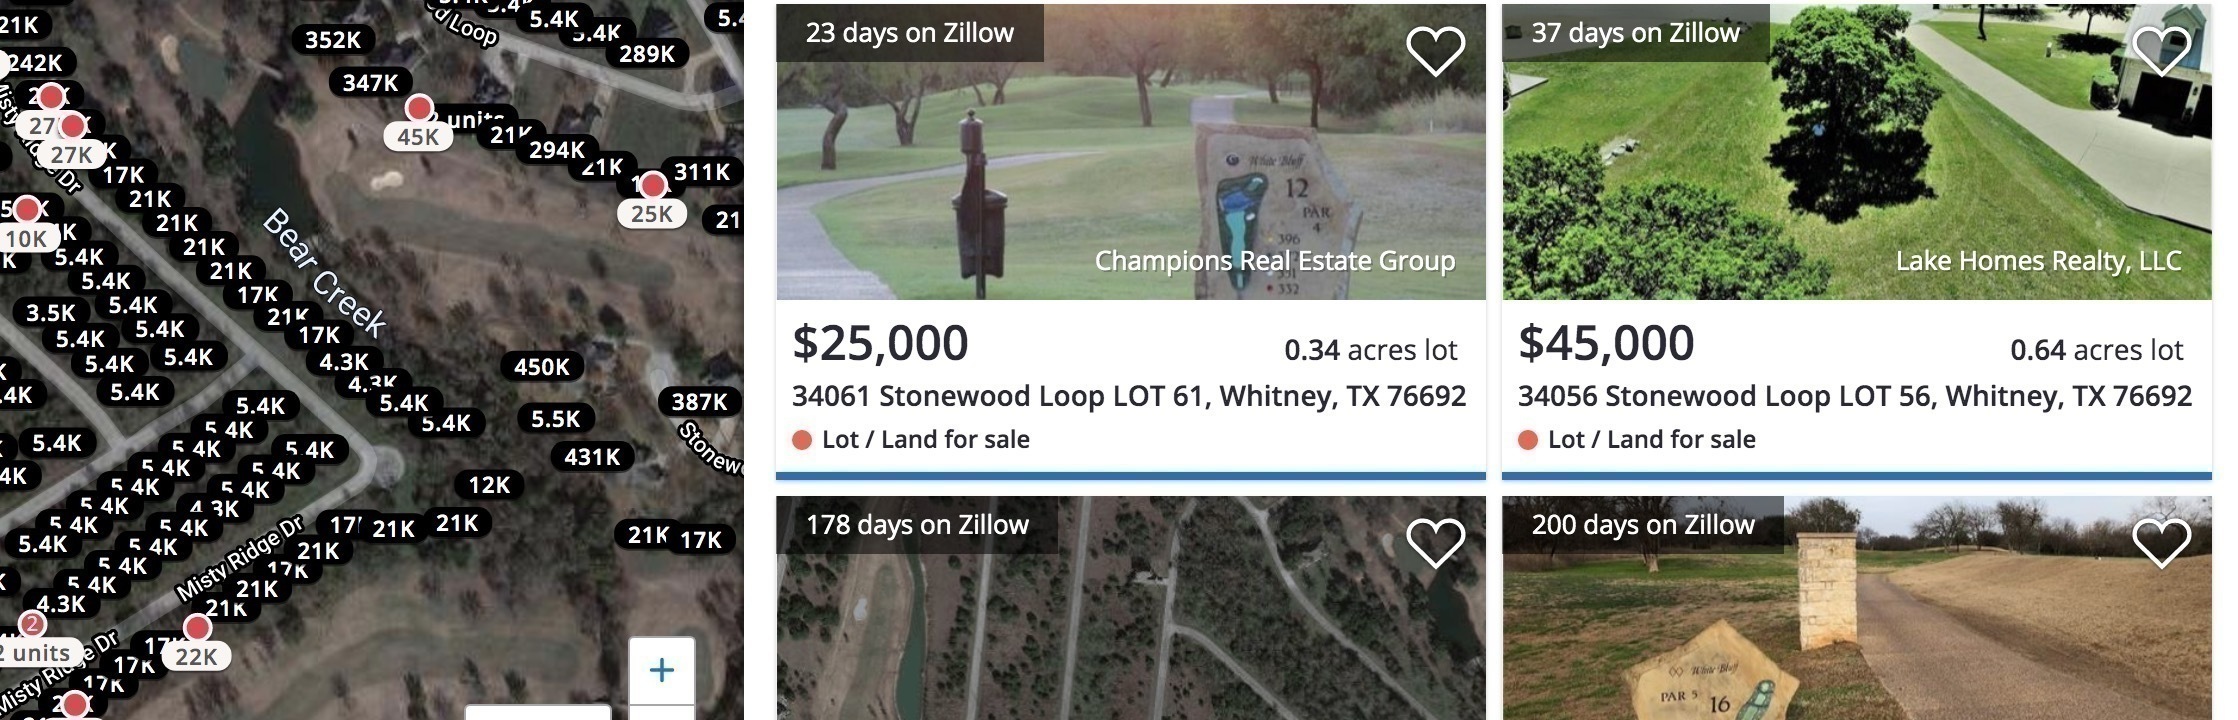 Other Lots Listed for Sale -- Ours is Cheaper and Has an Owner Finance Option